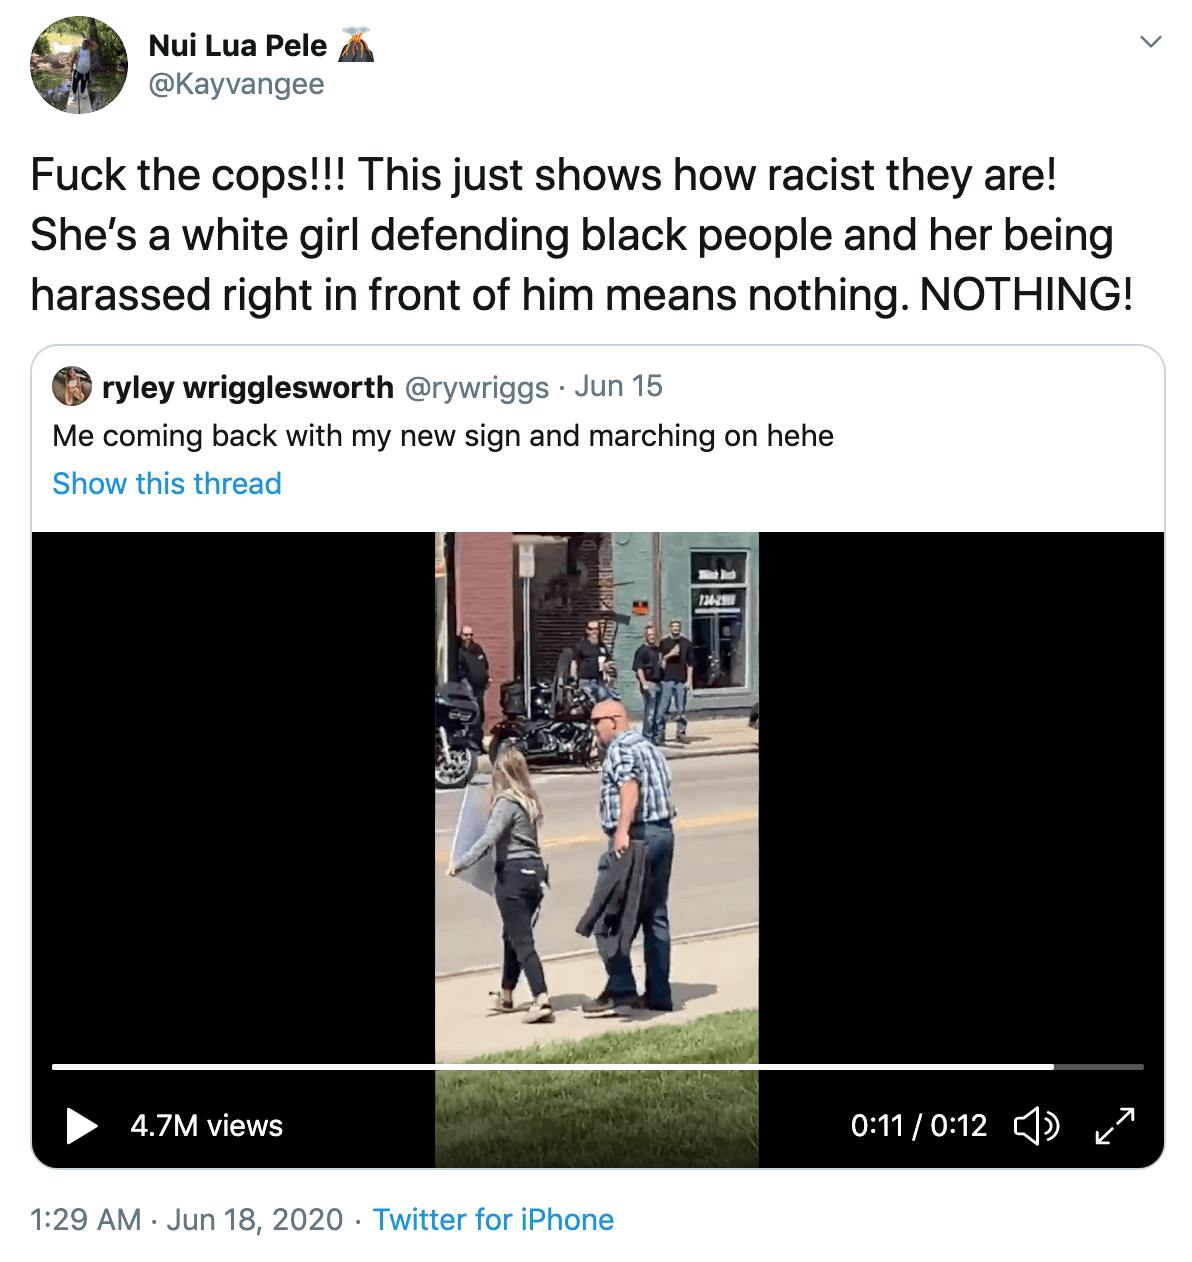 Fuck the cops!!! This just shows how racist they are! She’s a white girl defending black people and her being harassed right in front of him means nothing. NOTHING!